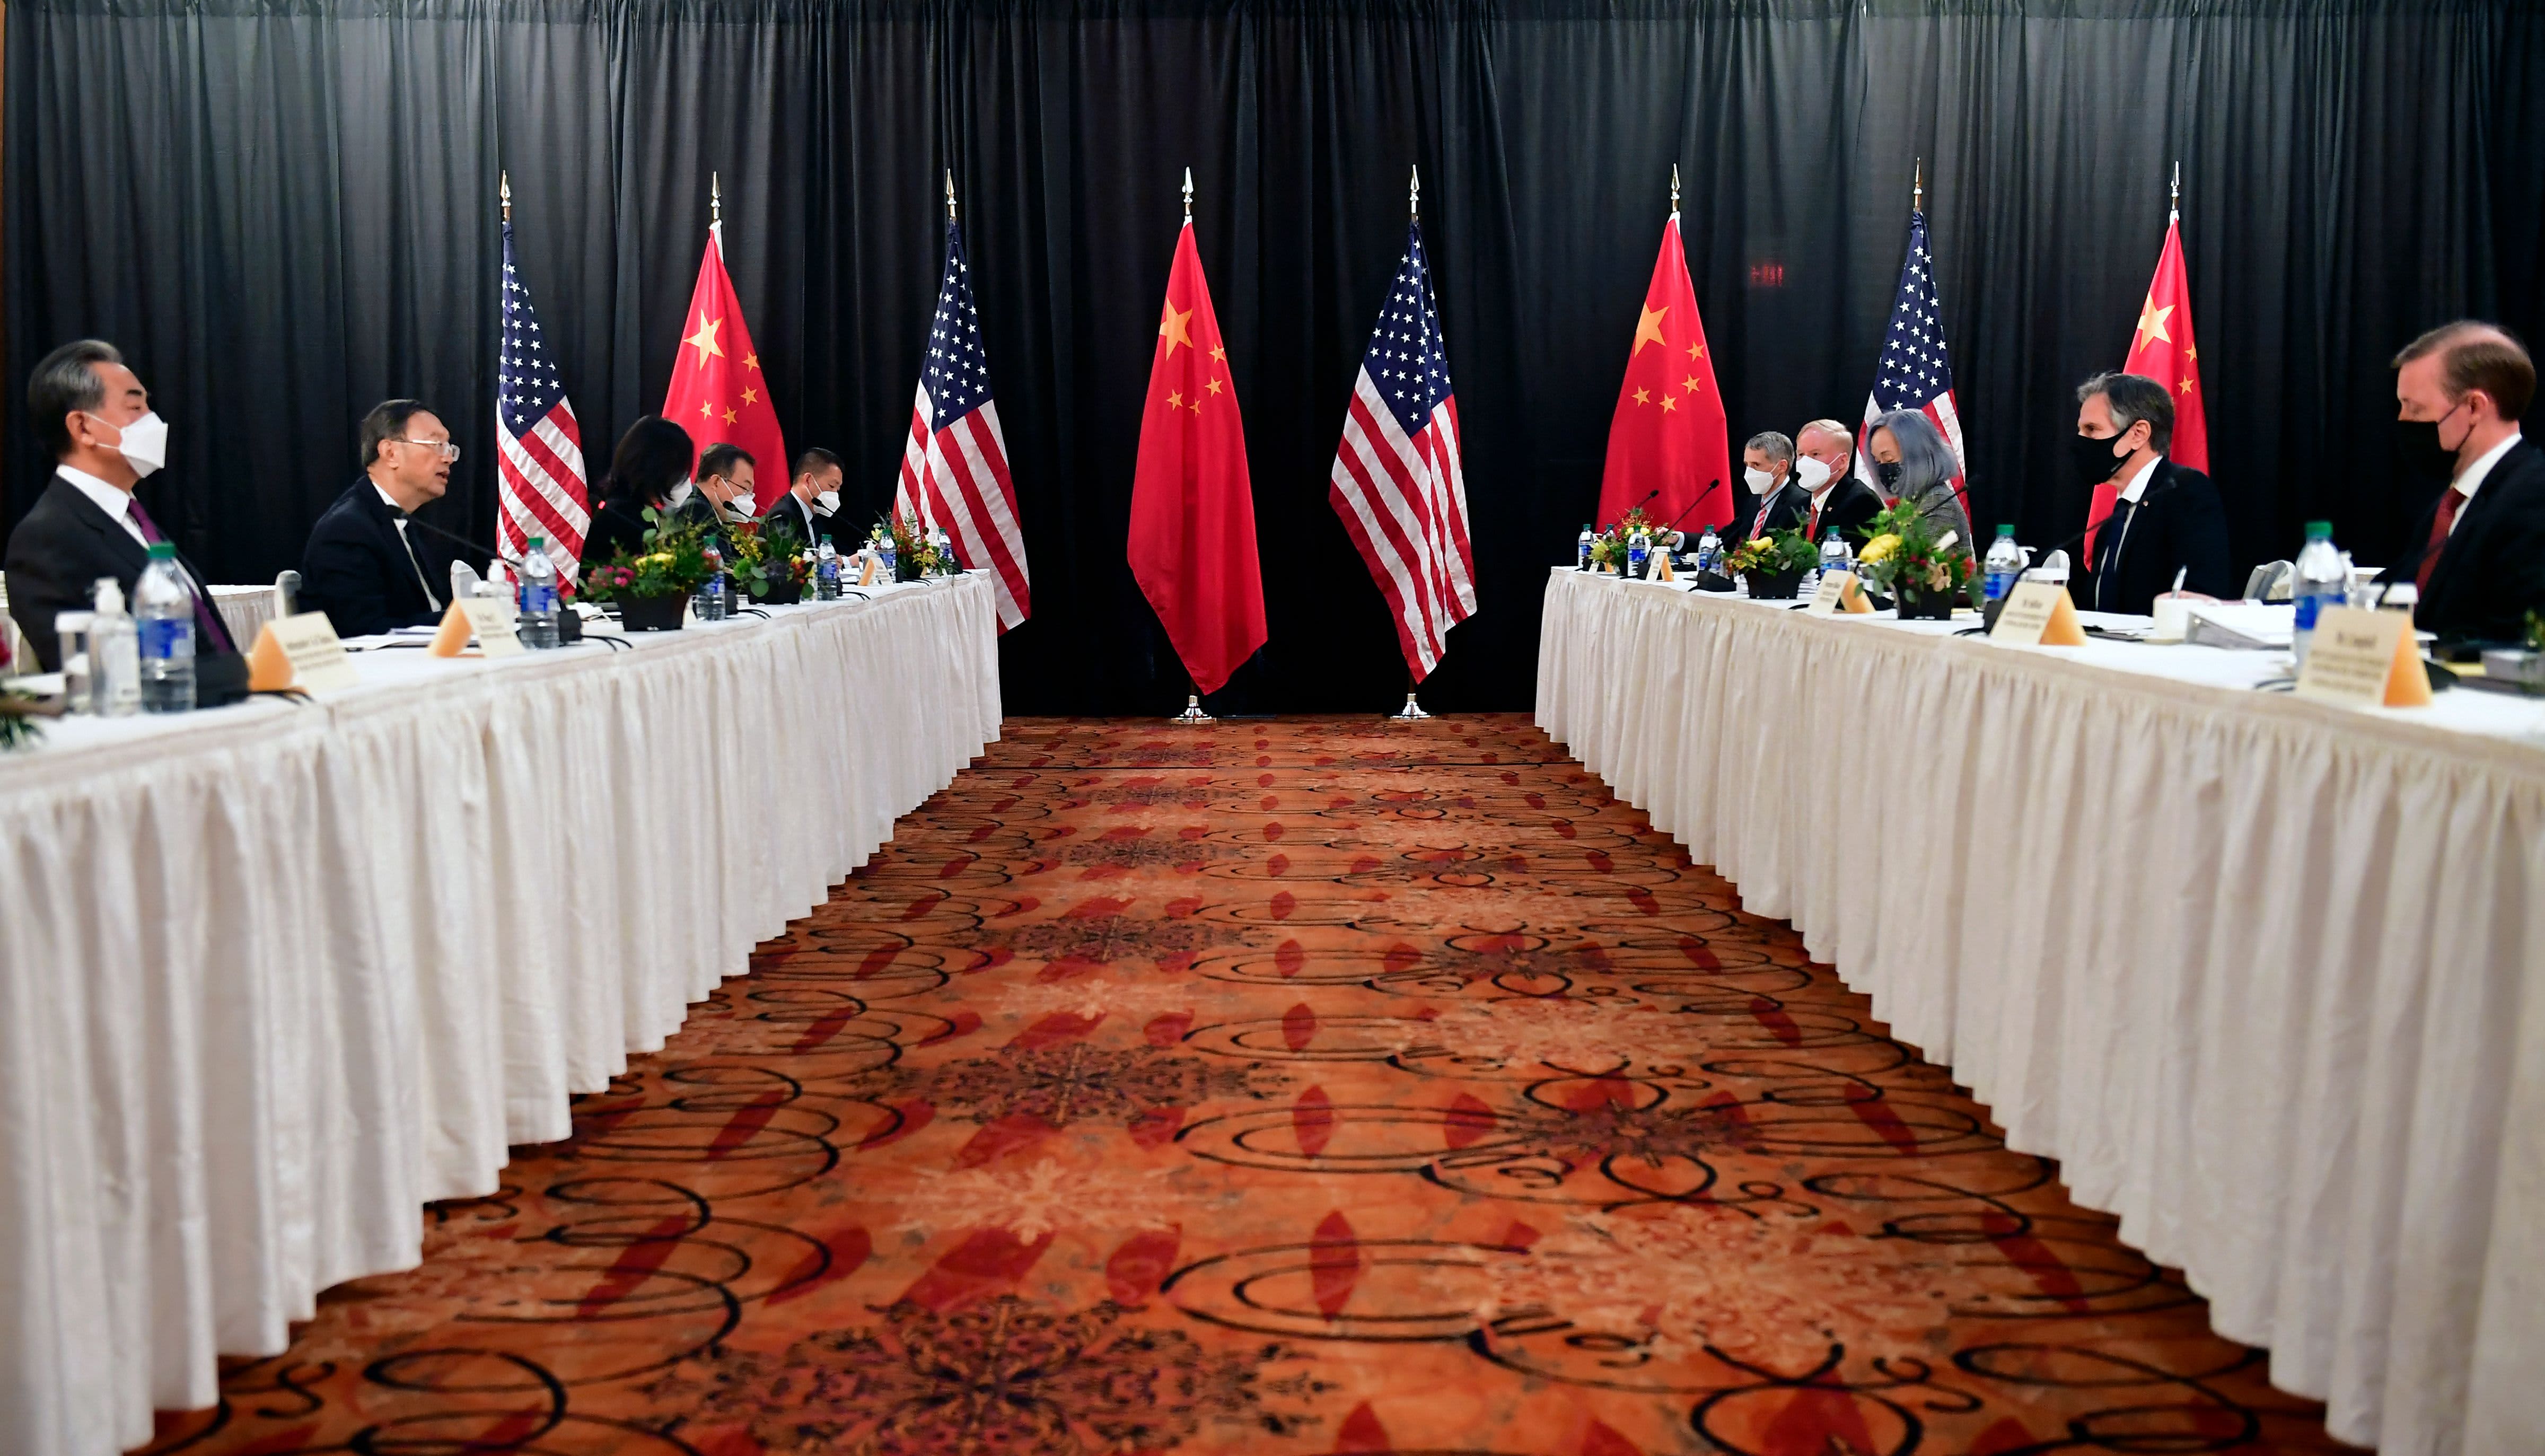 The first meeting between America and China under Biden begins in a rocky way